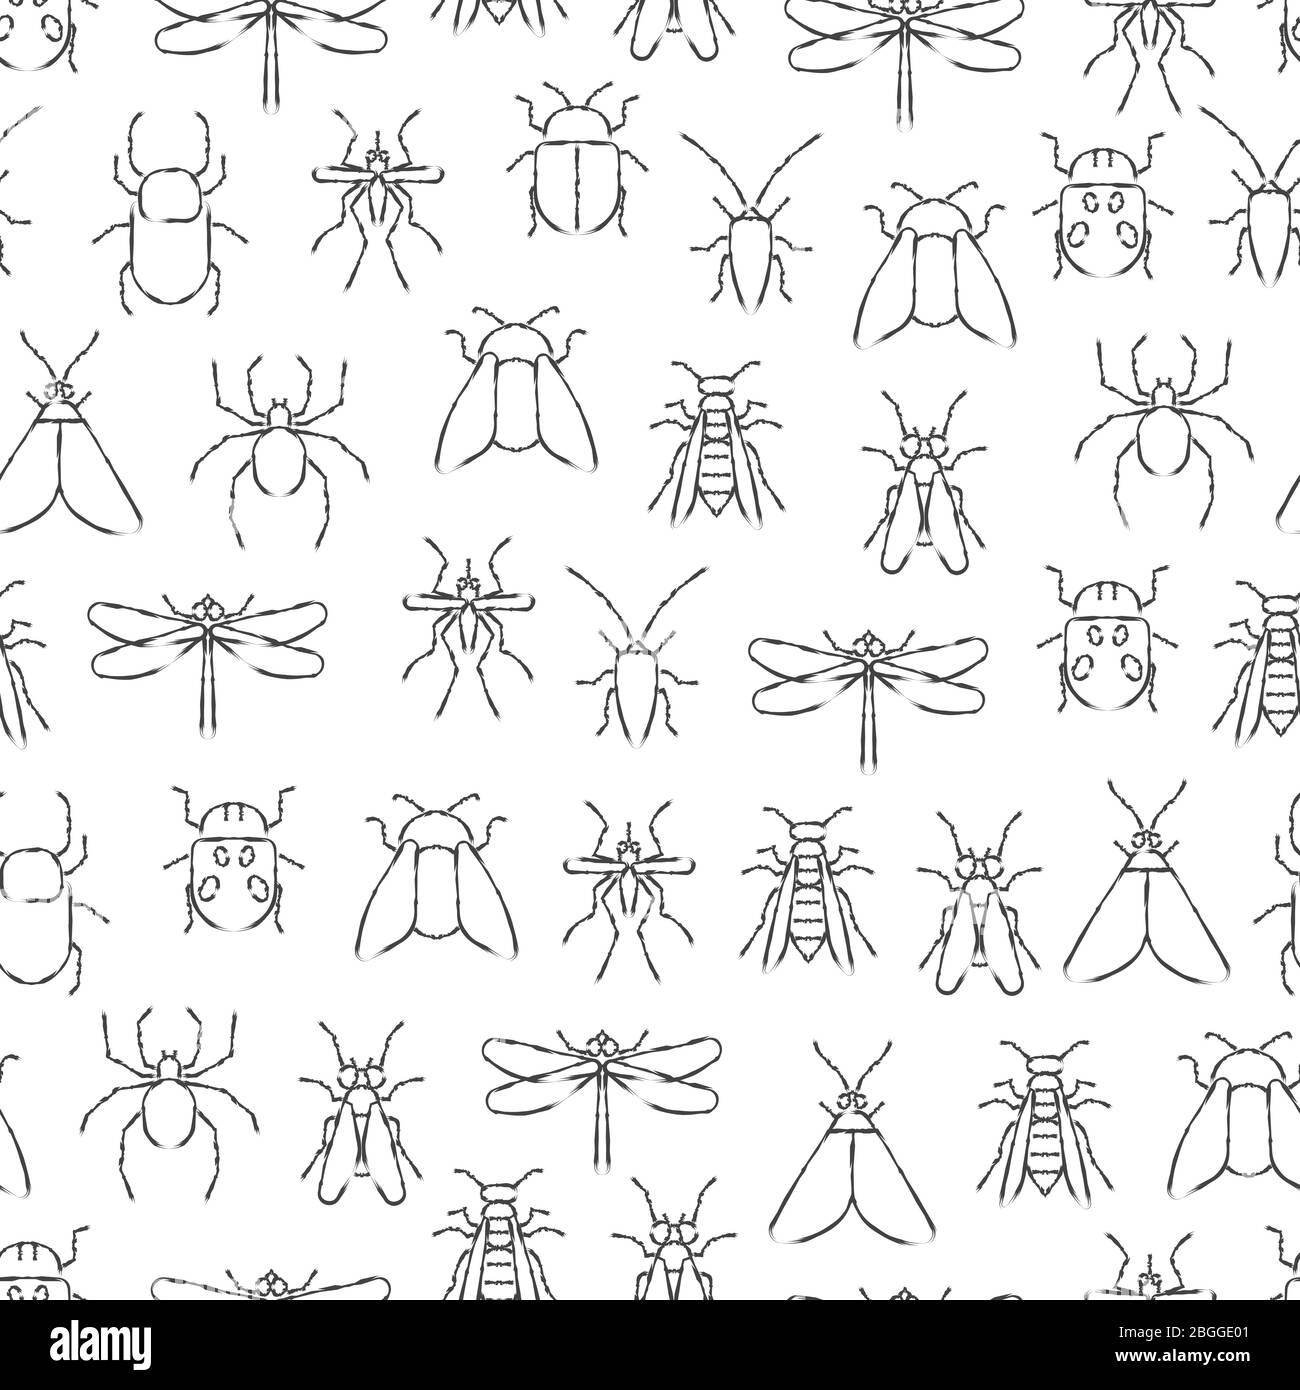 Pencil drawing insects seamless background pattern. Wild nature seamless texture. Vector illustration Stock Vector